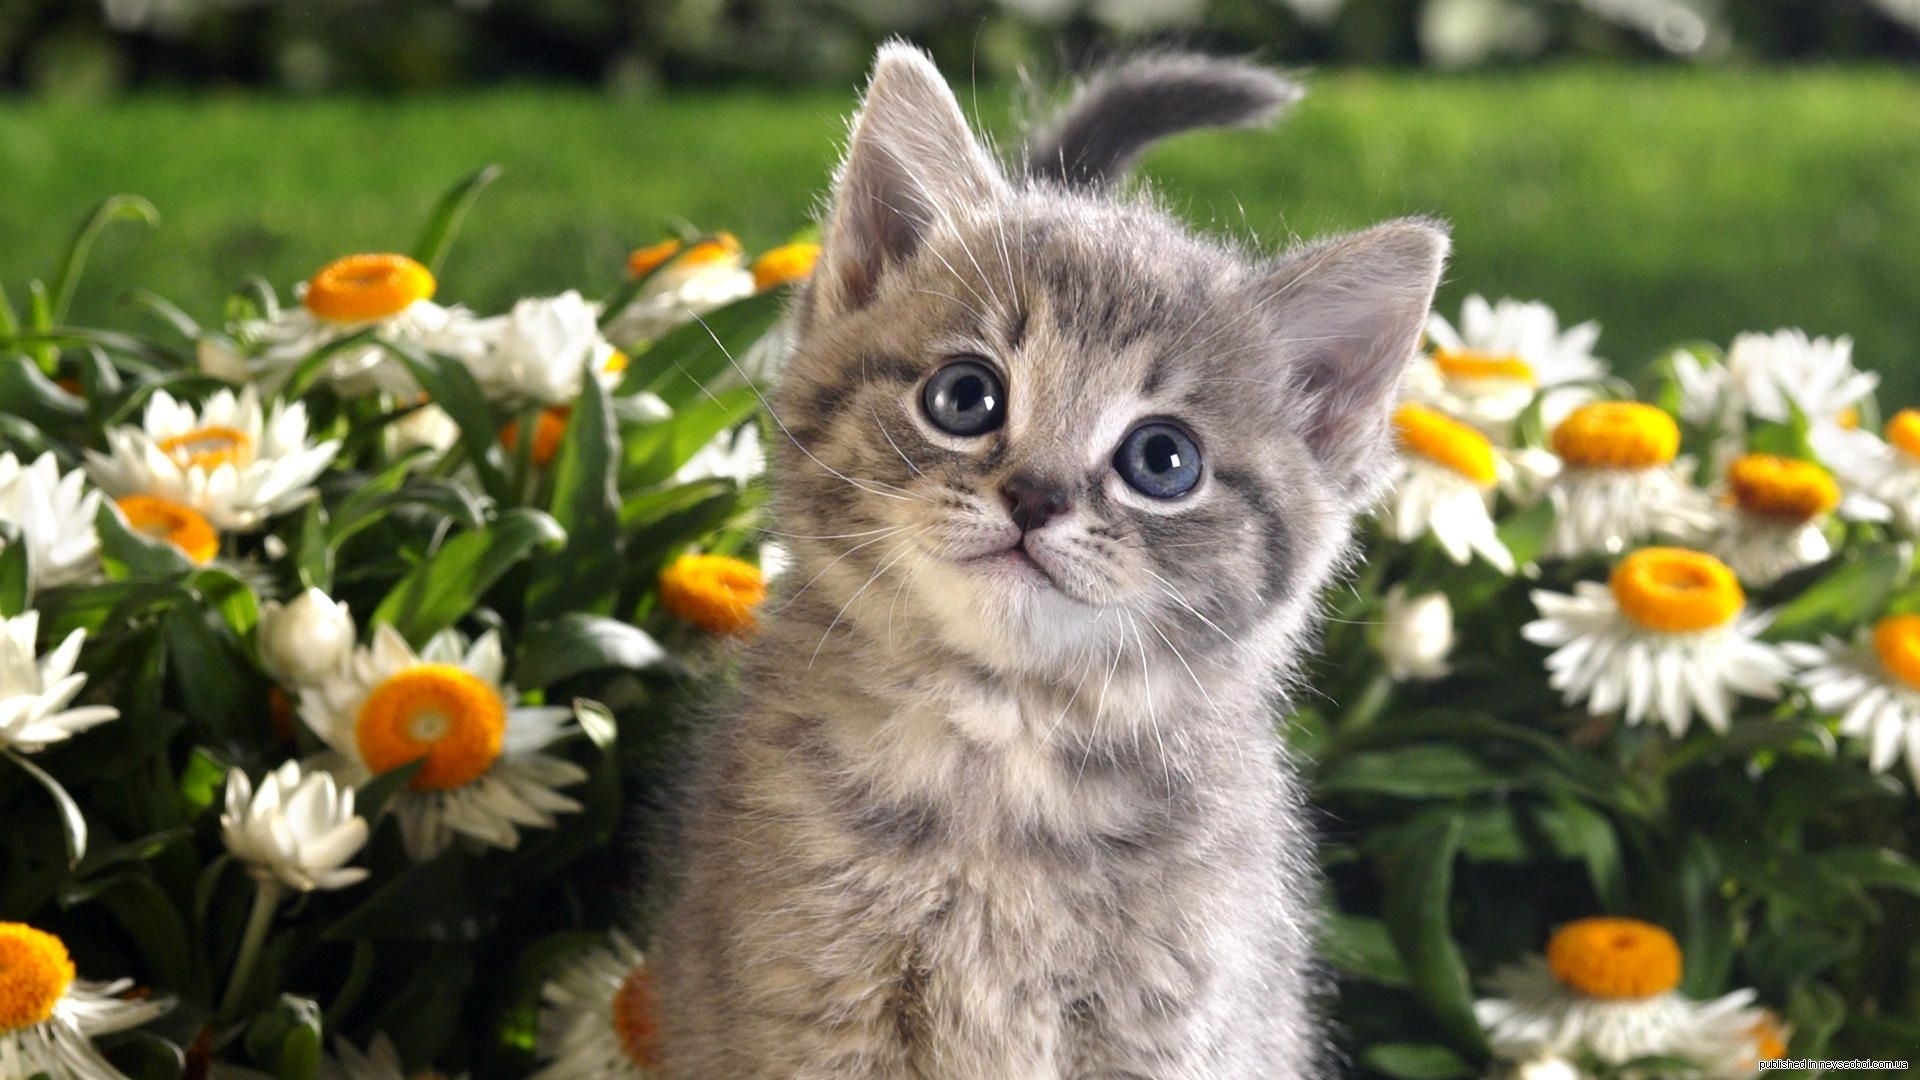 Beautiful Pictures Of Kittens